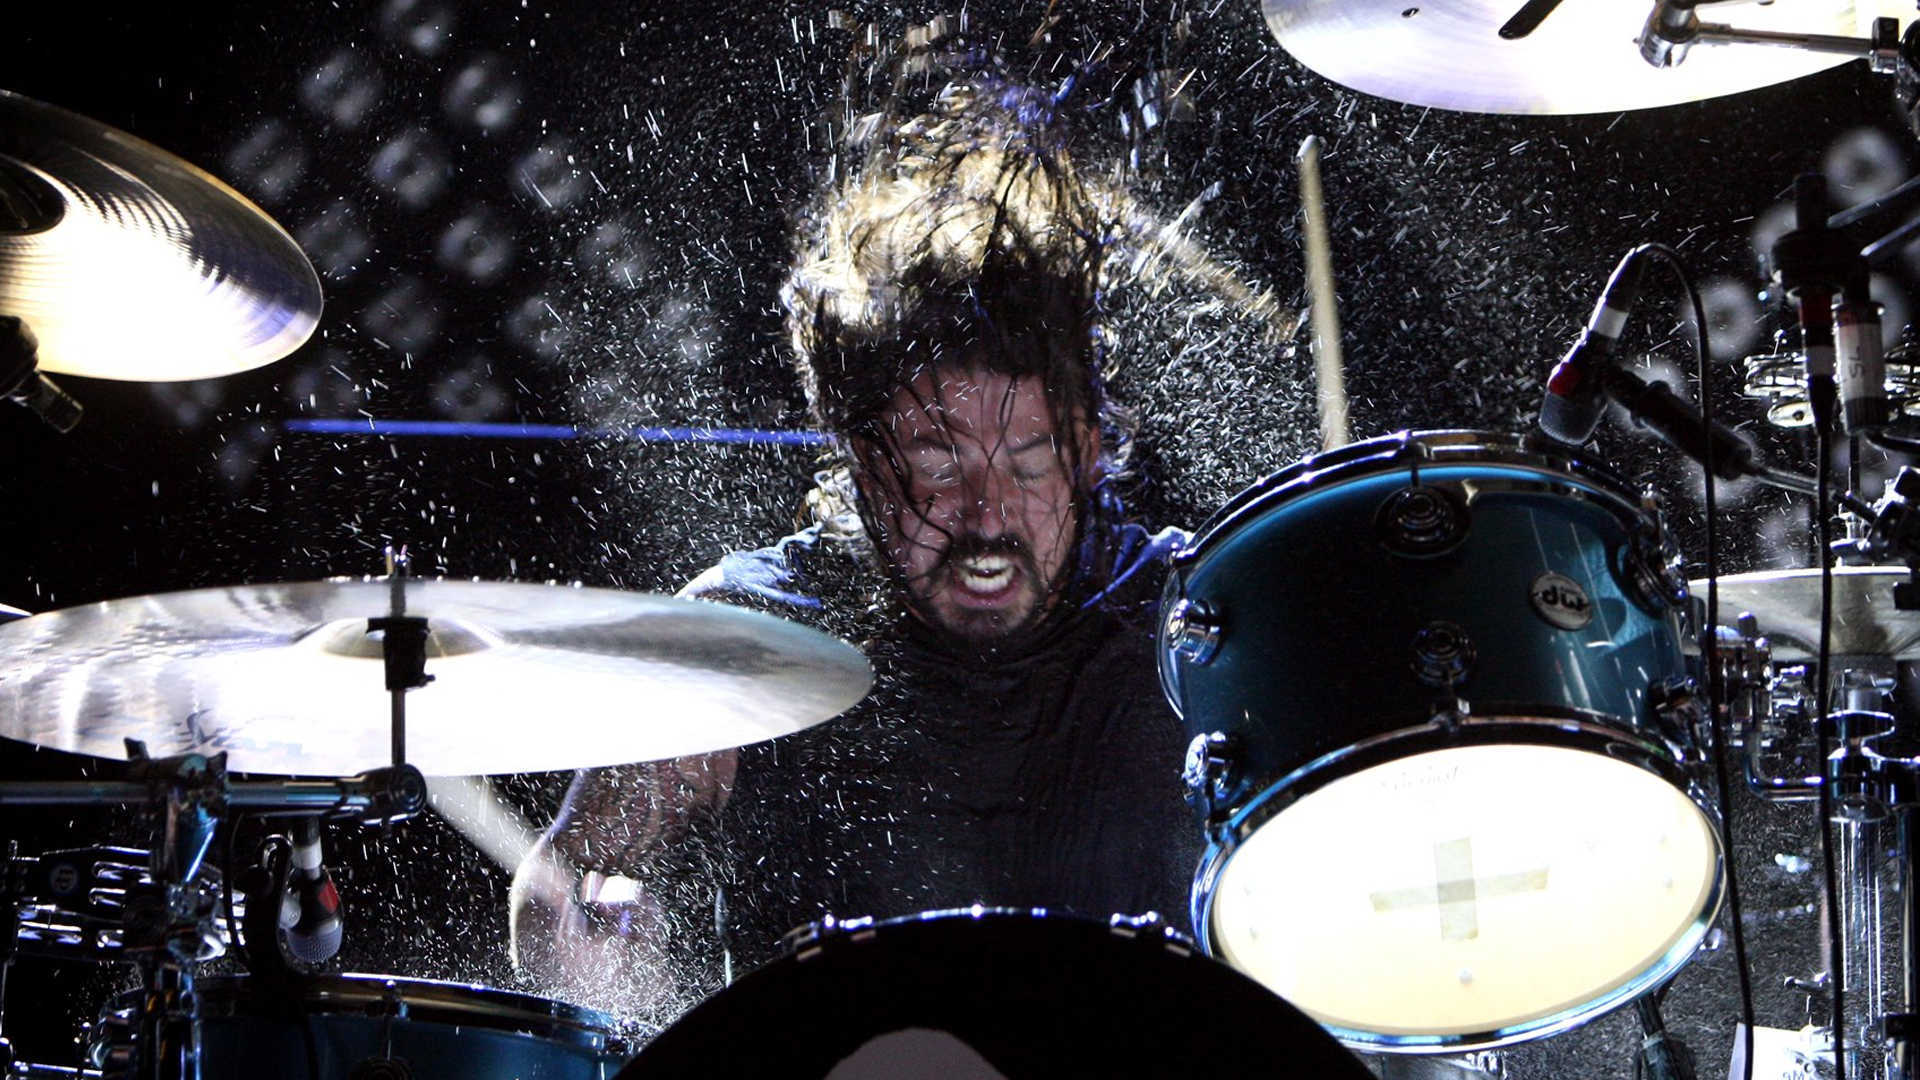 Wallpaper Dave Grohl HD 1080p Upload At August